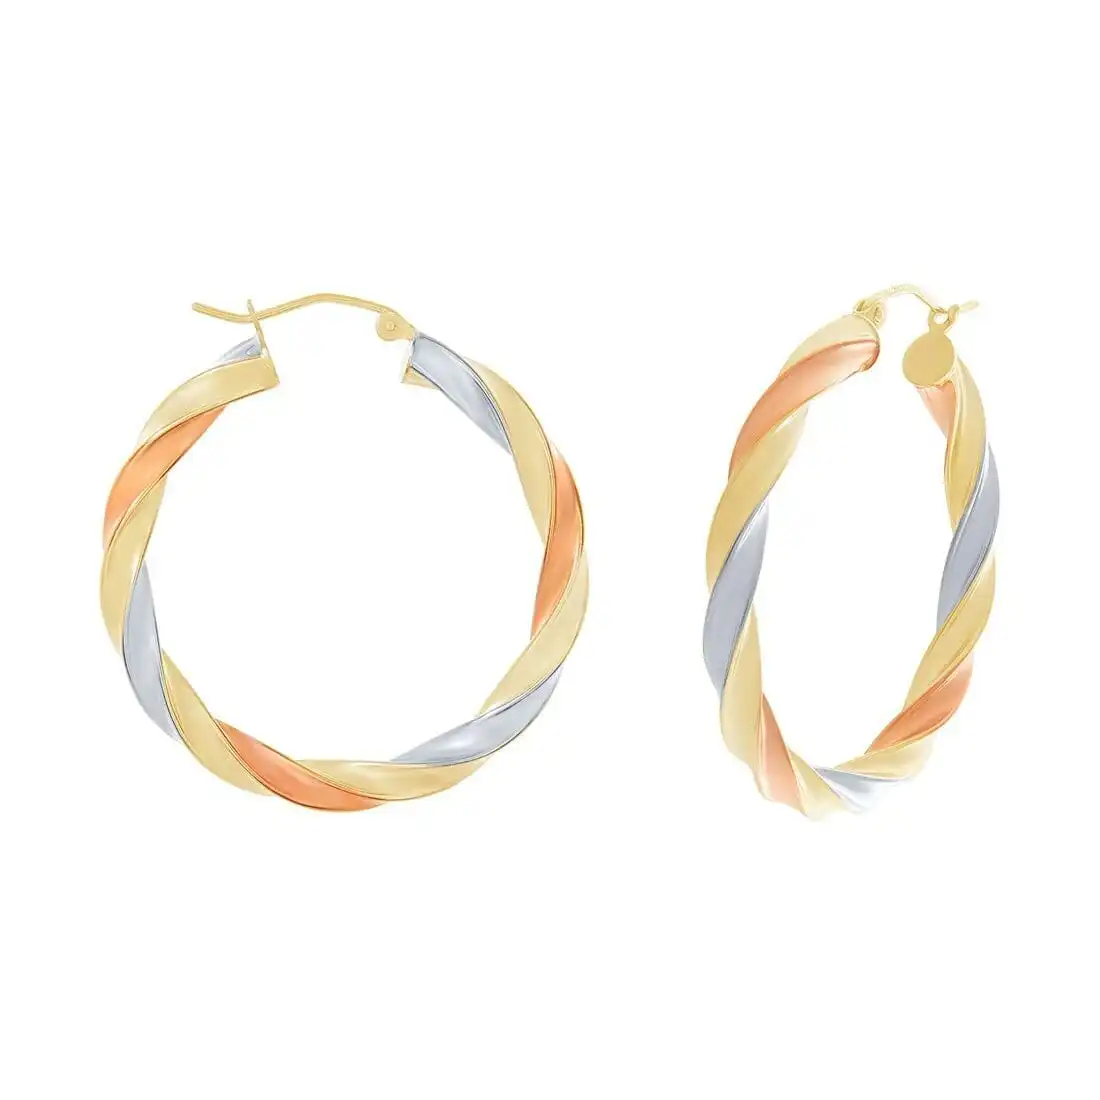 9ct Yellow Gold Three Tone Silver Infused Twist Earrings in 55mm